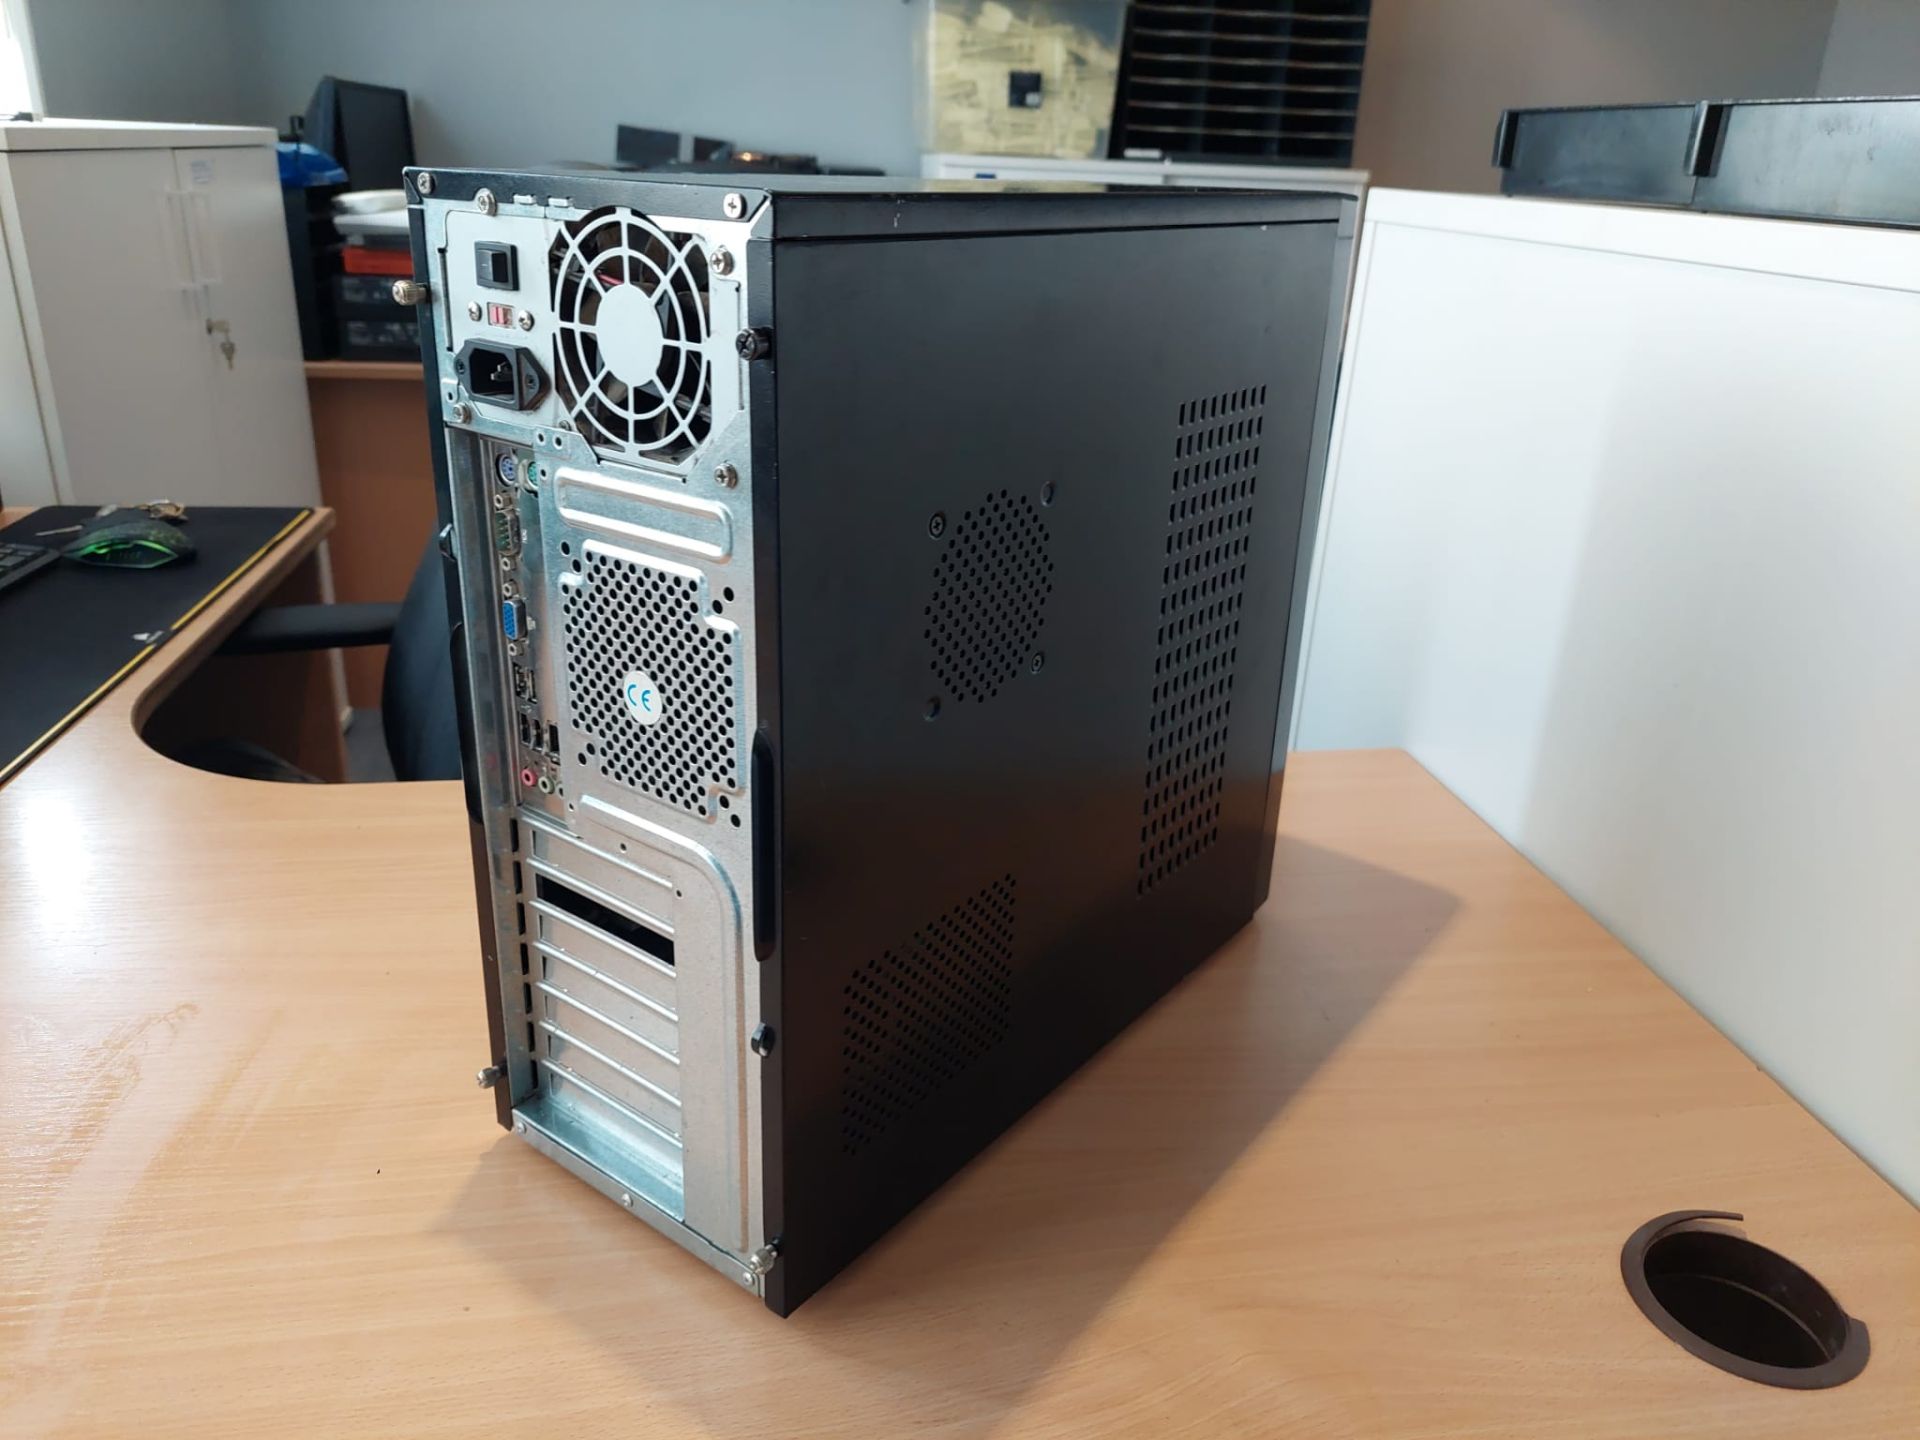 2010 Athlon II x4 360 PC (Has some issues) *NO VAT* - Image 7 of 12